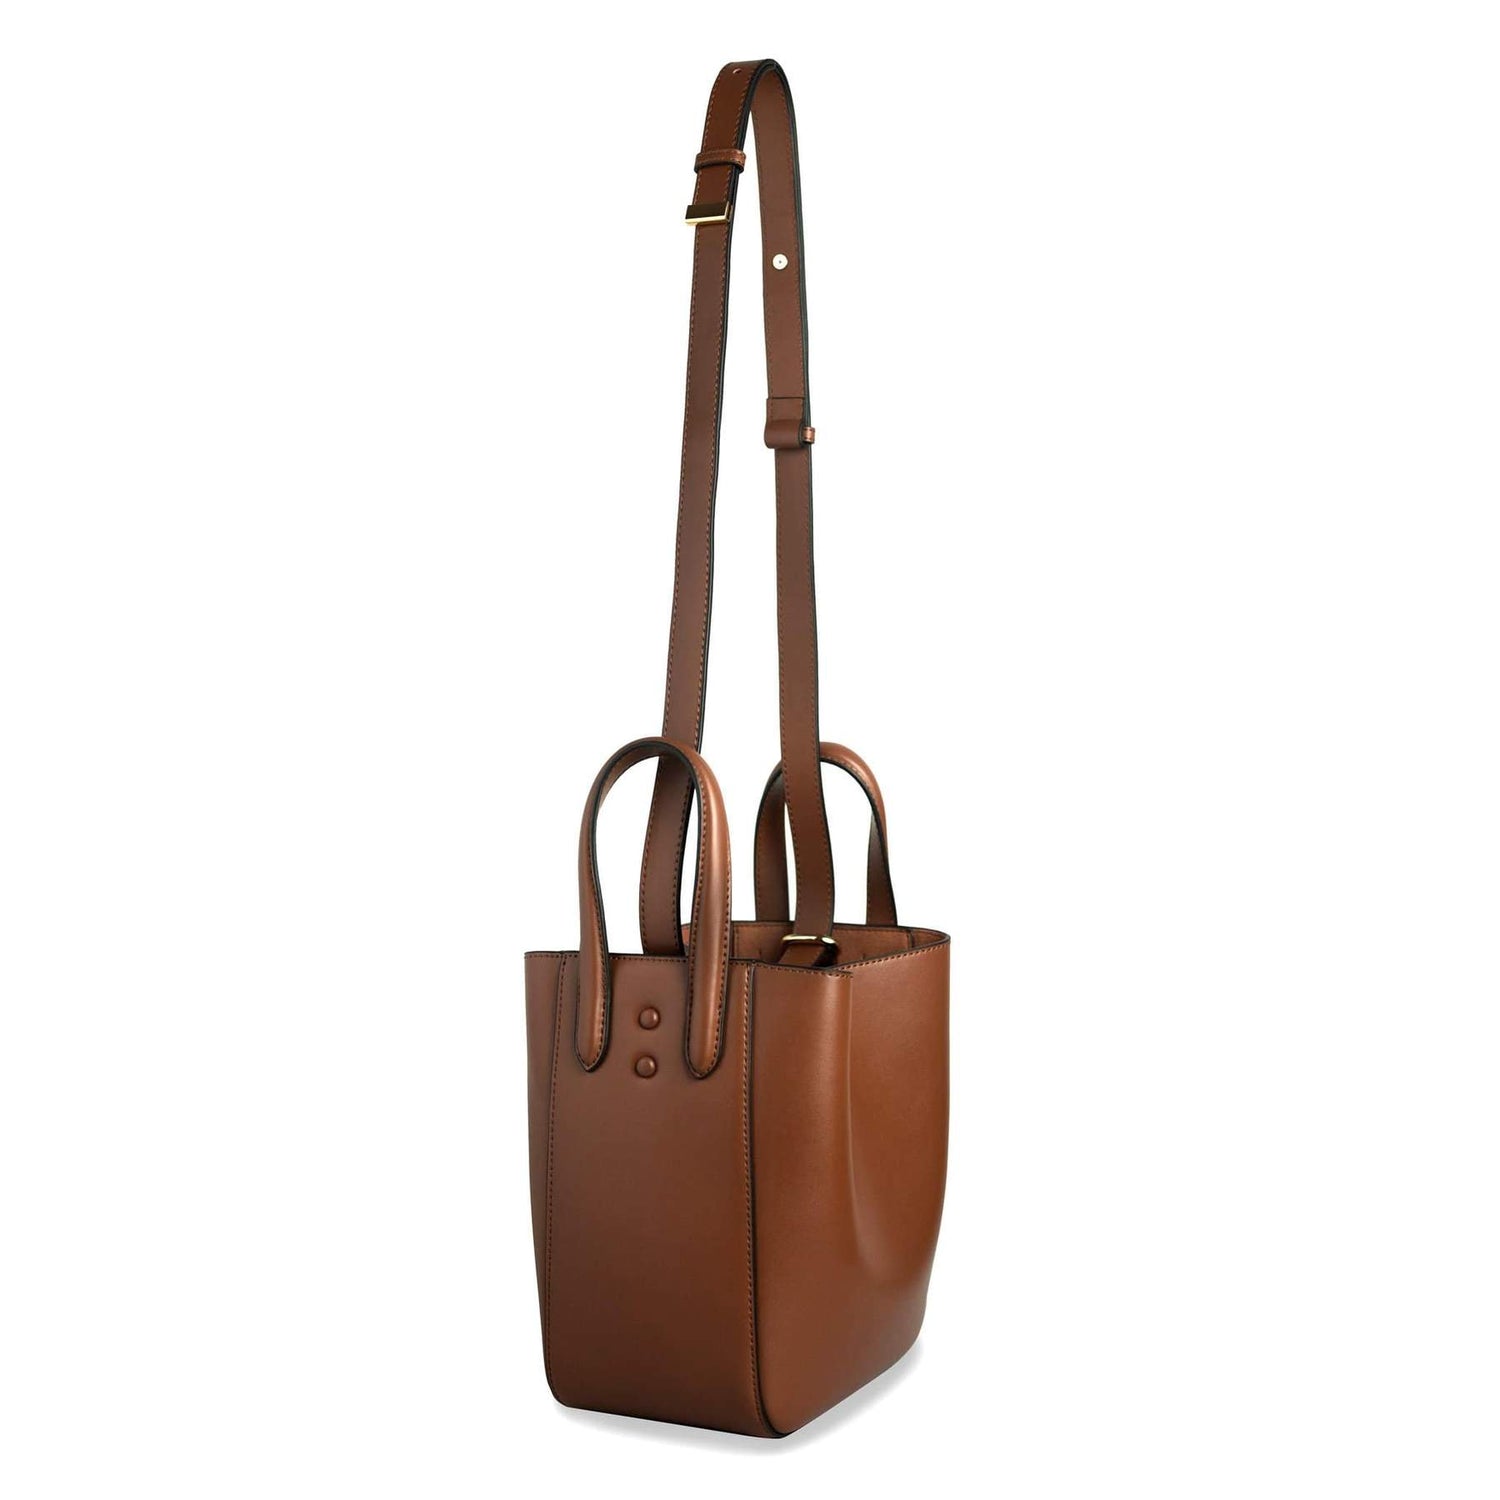 X NIHILO - EIGHT MINI TOTE BUCKET BAG - TAN Side view with strap lifted